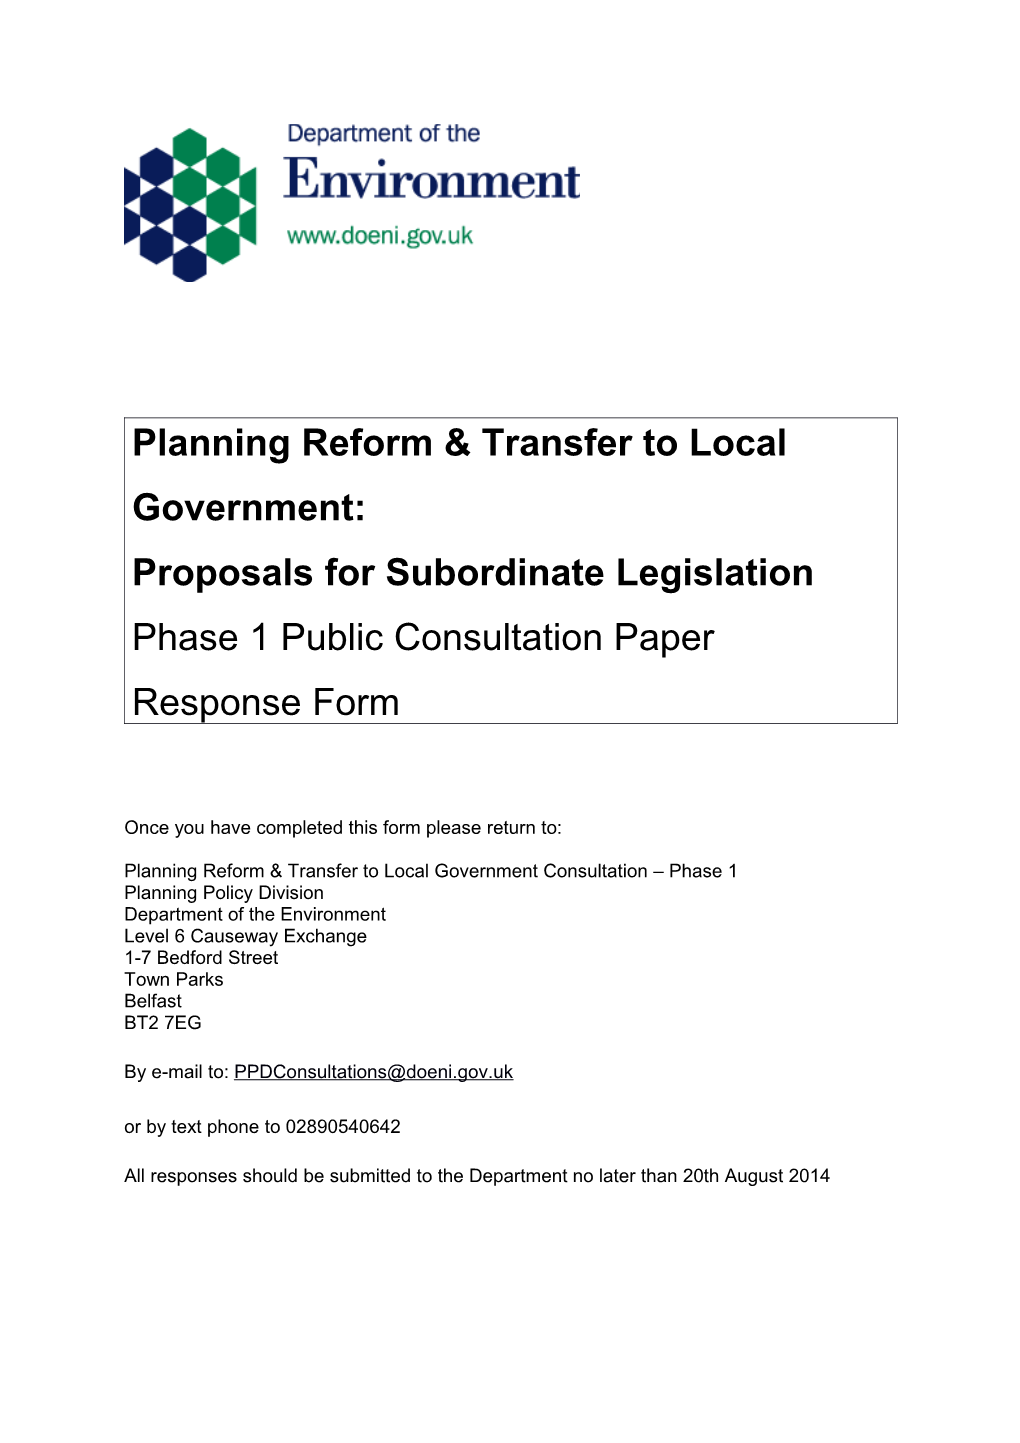 Planning Reform & Transfer to Local Government